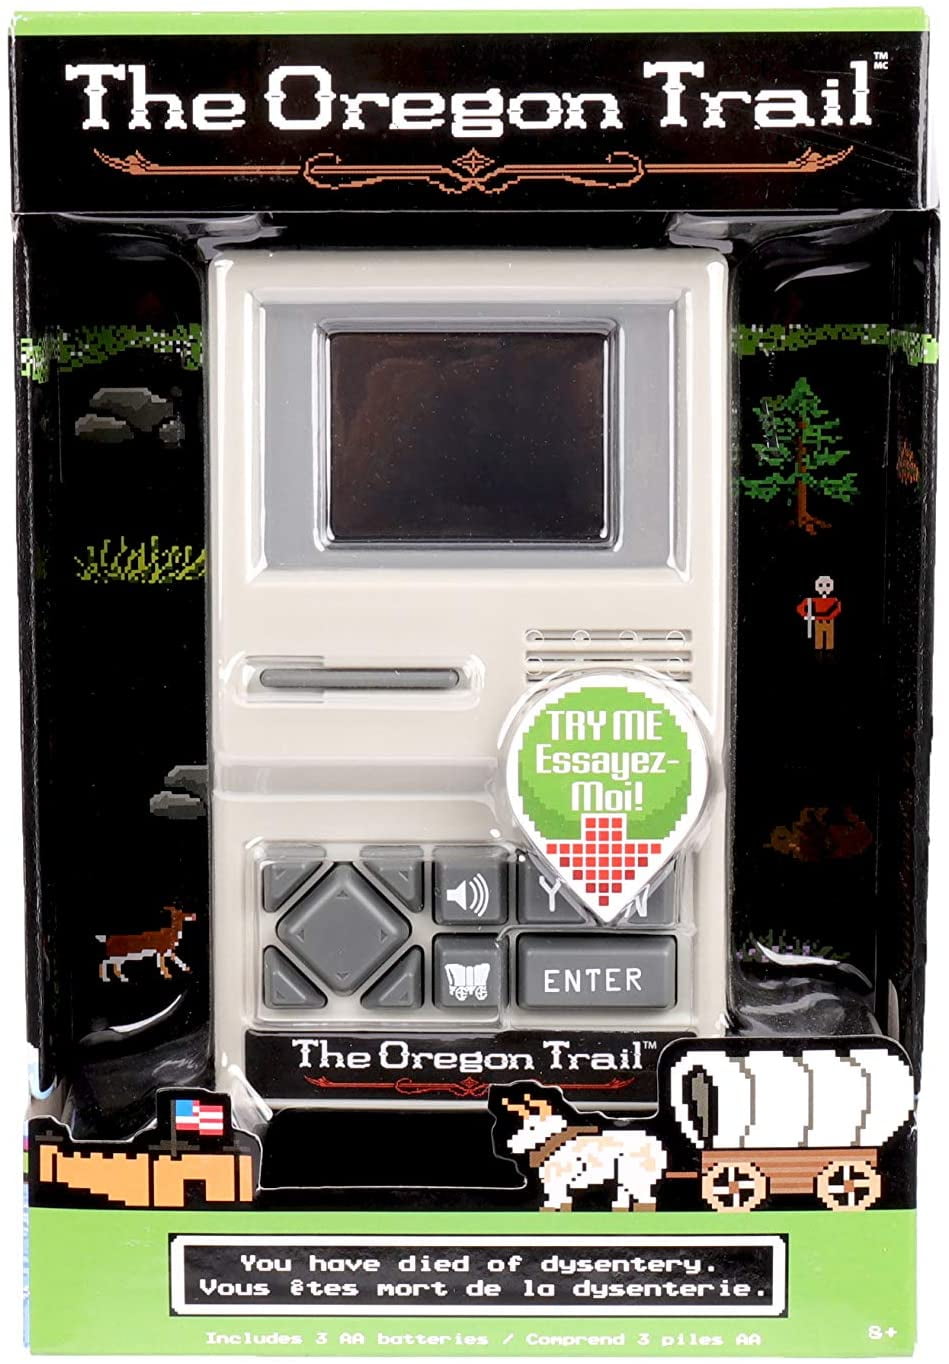 NEW SEALED!❤️ ❤️Micro Oregon Trail Arcade Classic Game With Charger 